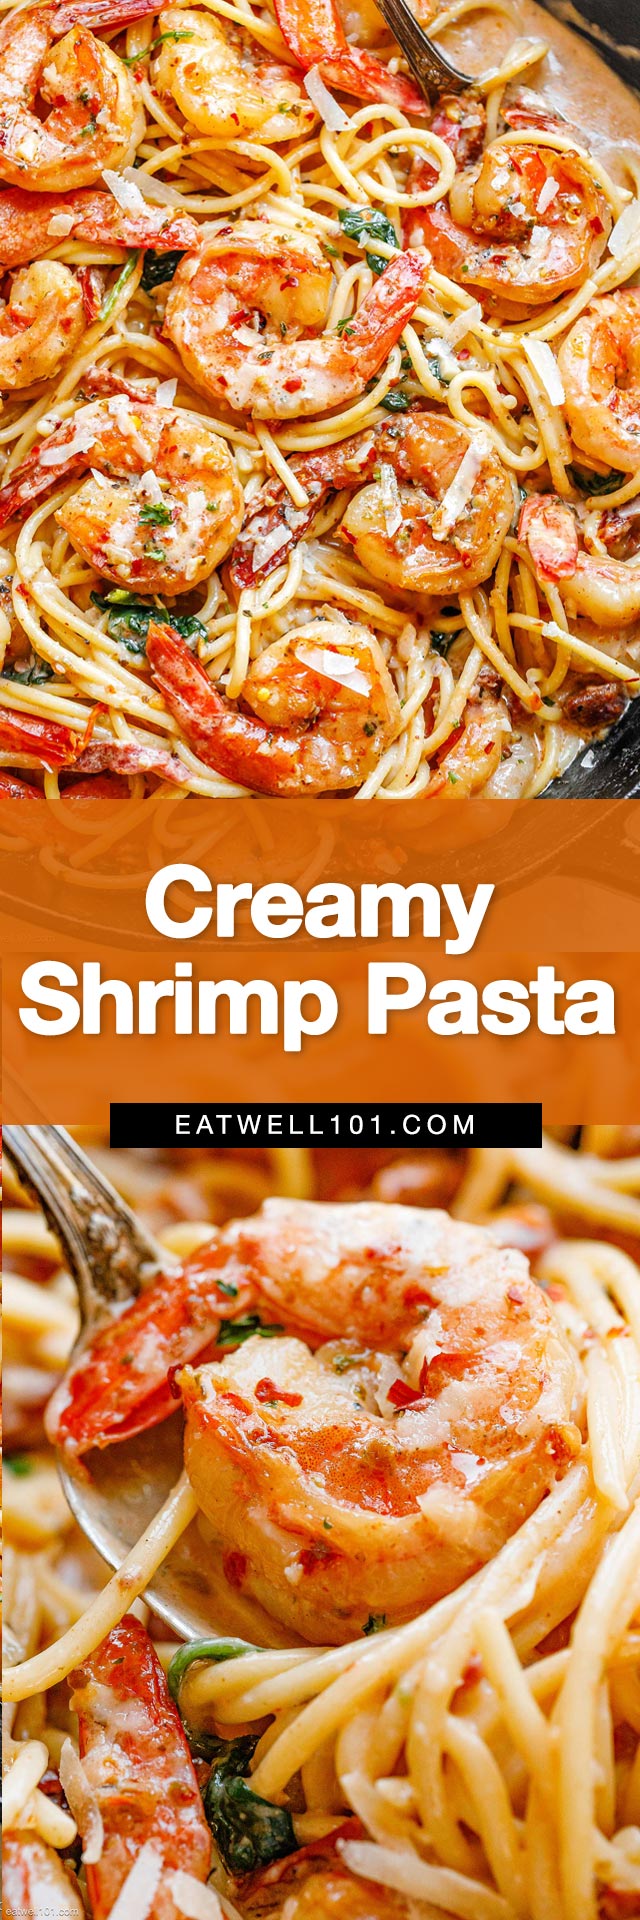 Creamy Tuscan Shrimp Pasta Recipe - #shrimp #pasta #recipe #eatwell101 - This creamy Tuscan shrimp pasta is so good, your family will be humming with every bite!